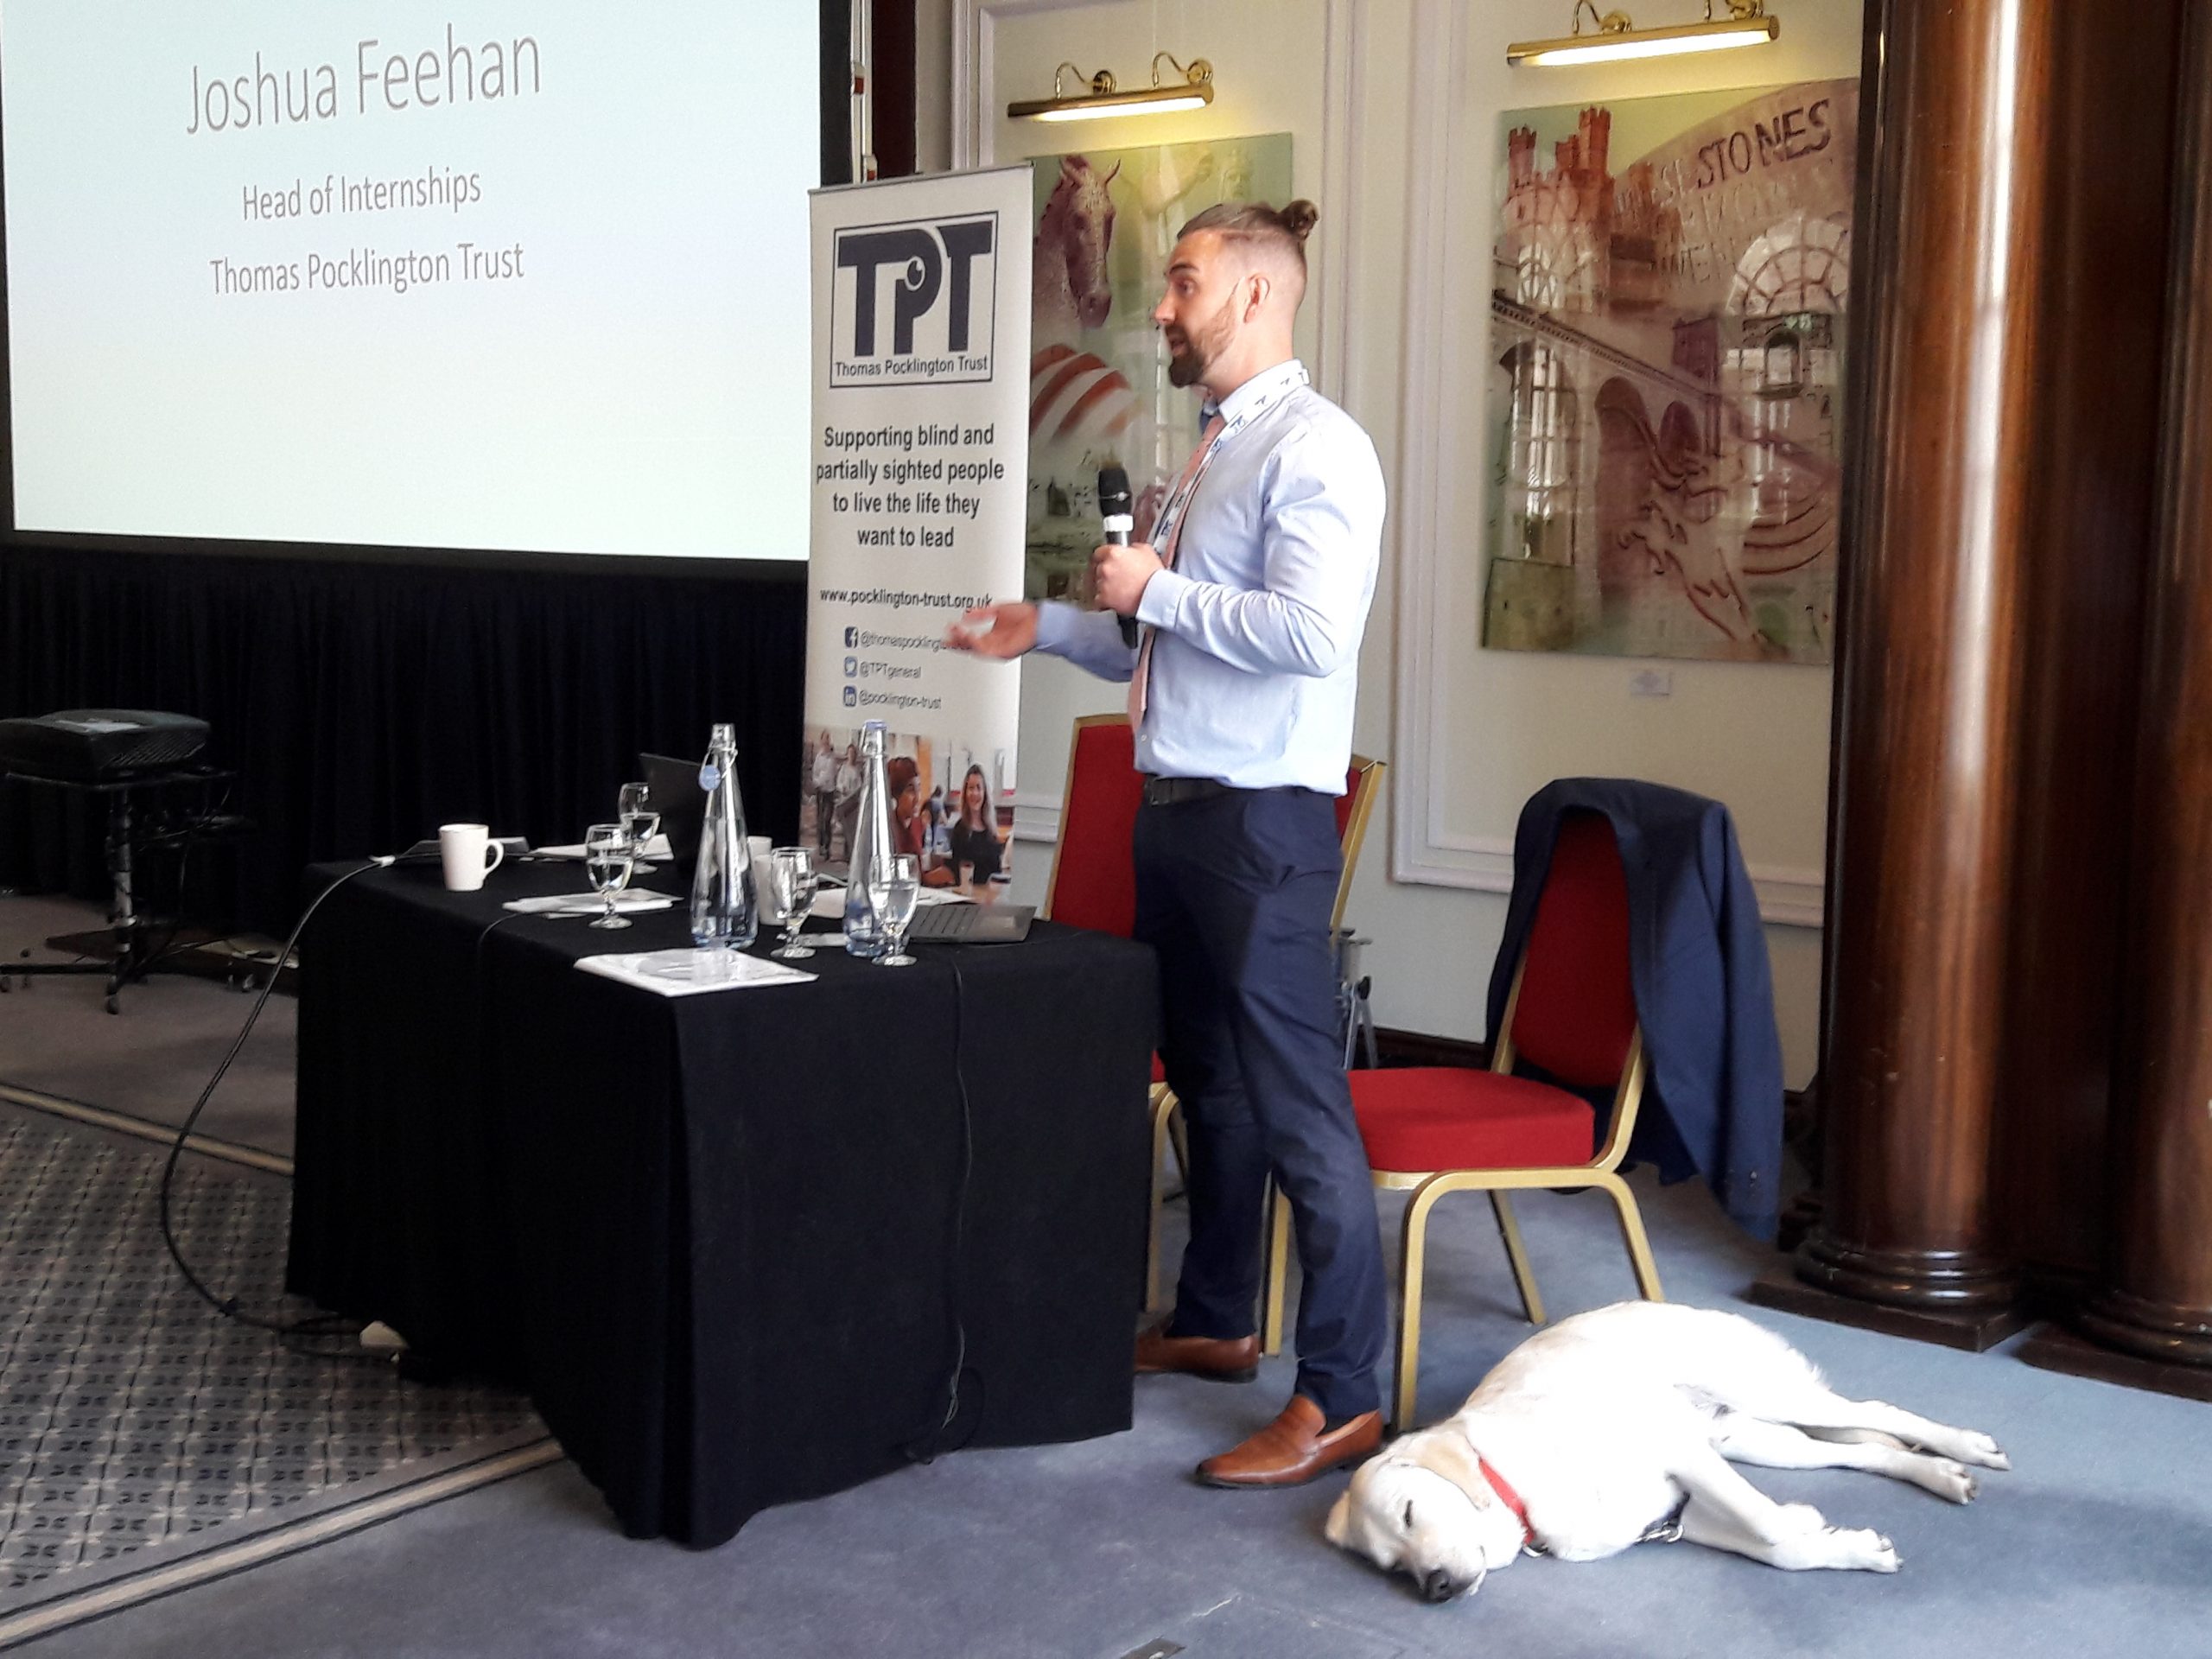 Josh Feehan, TPT's Head of internships standing next to a table and presenting the programme during the event. Next to him, his guide dig Ringo is lying on the floor.